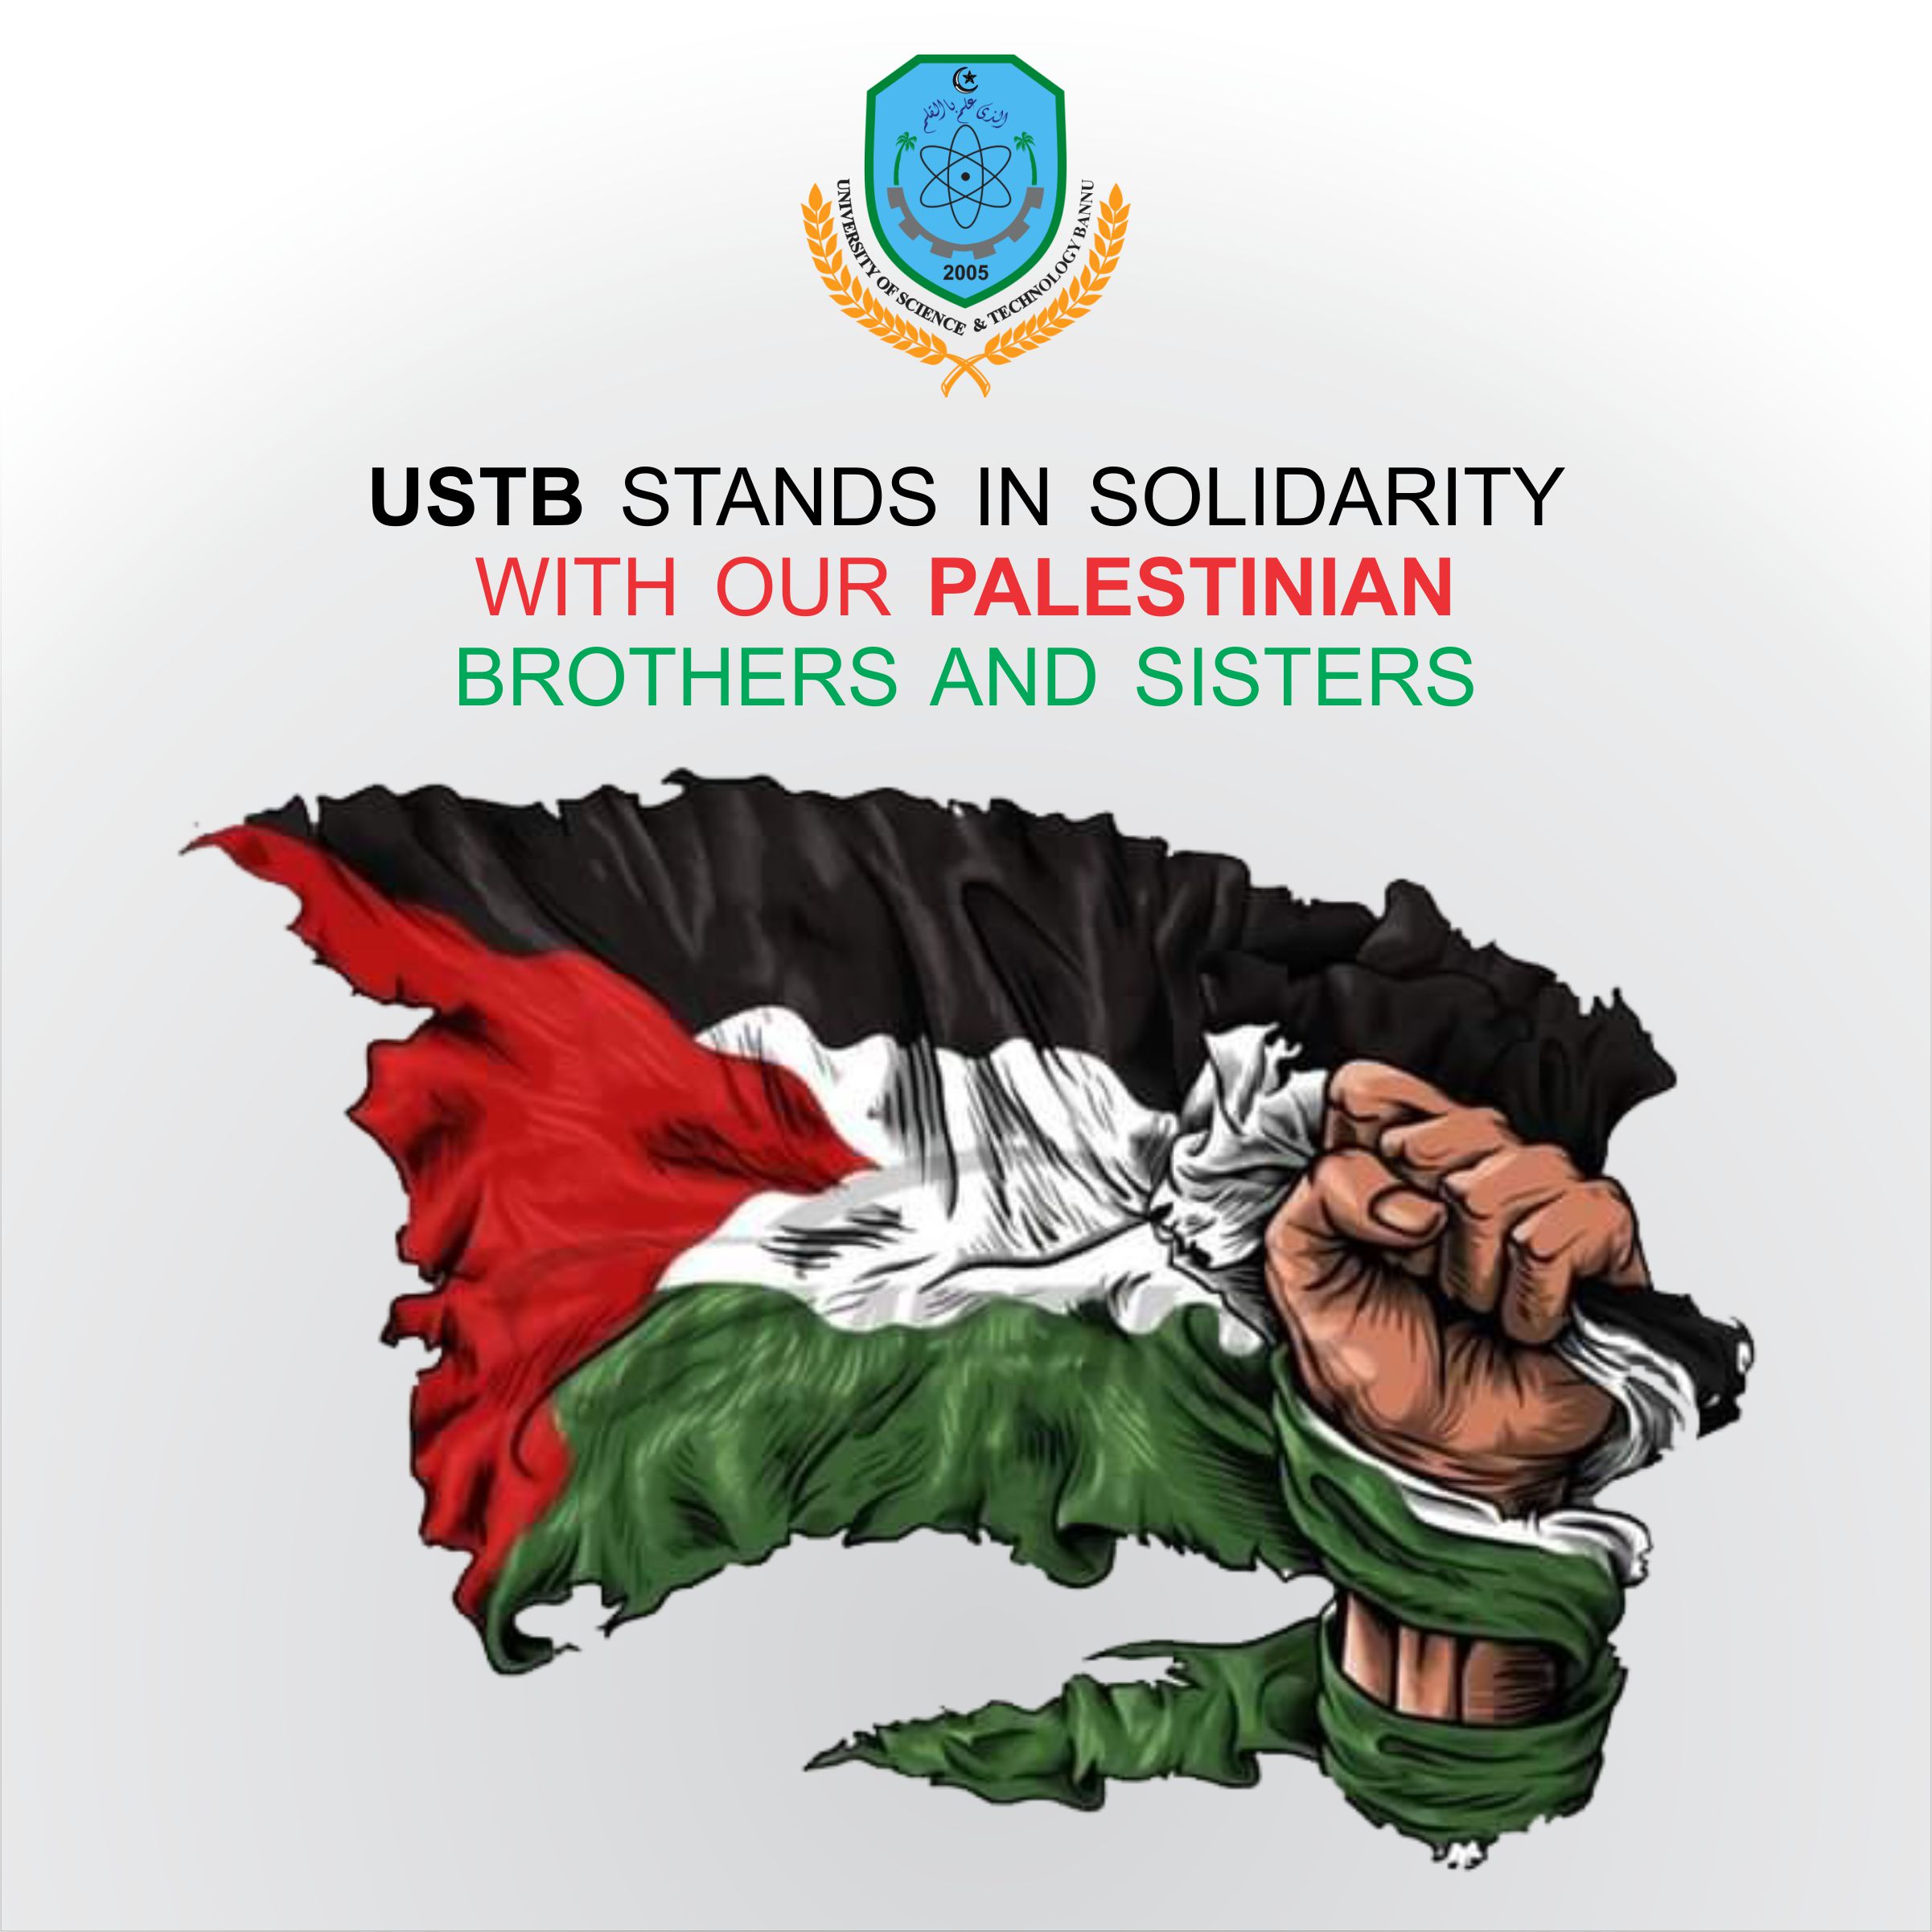 USTB stands in solidarity with our Palestinian brothers and sisters